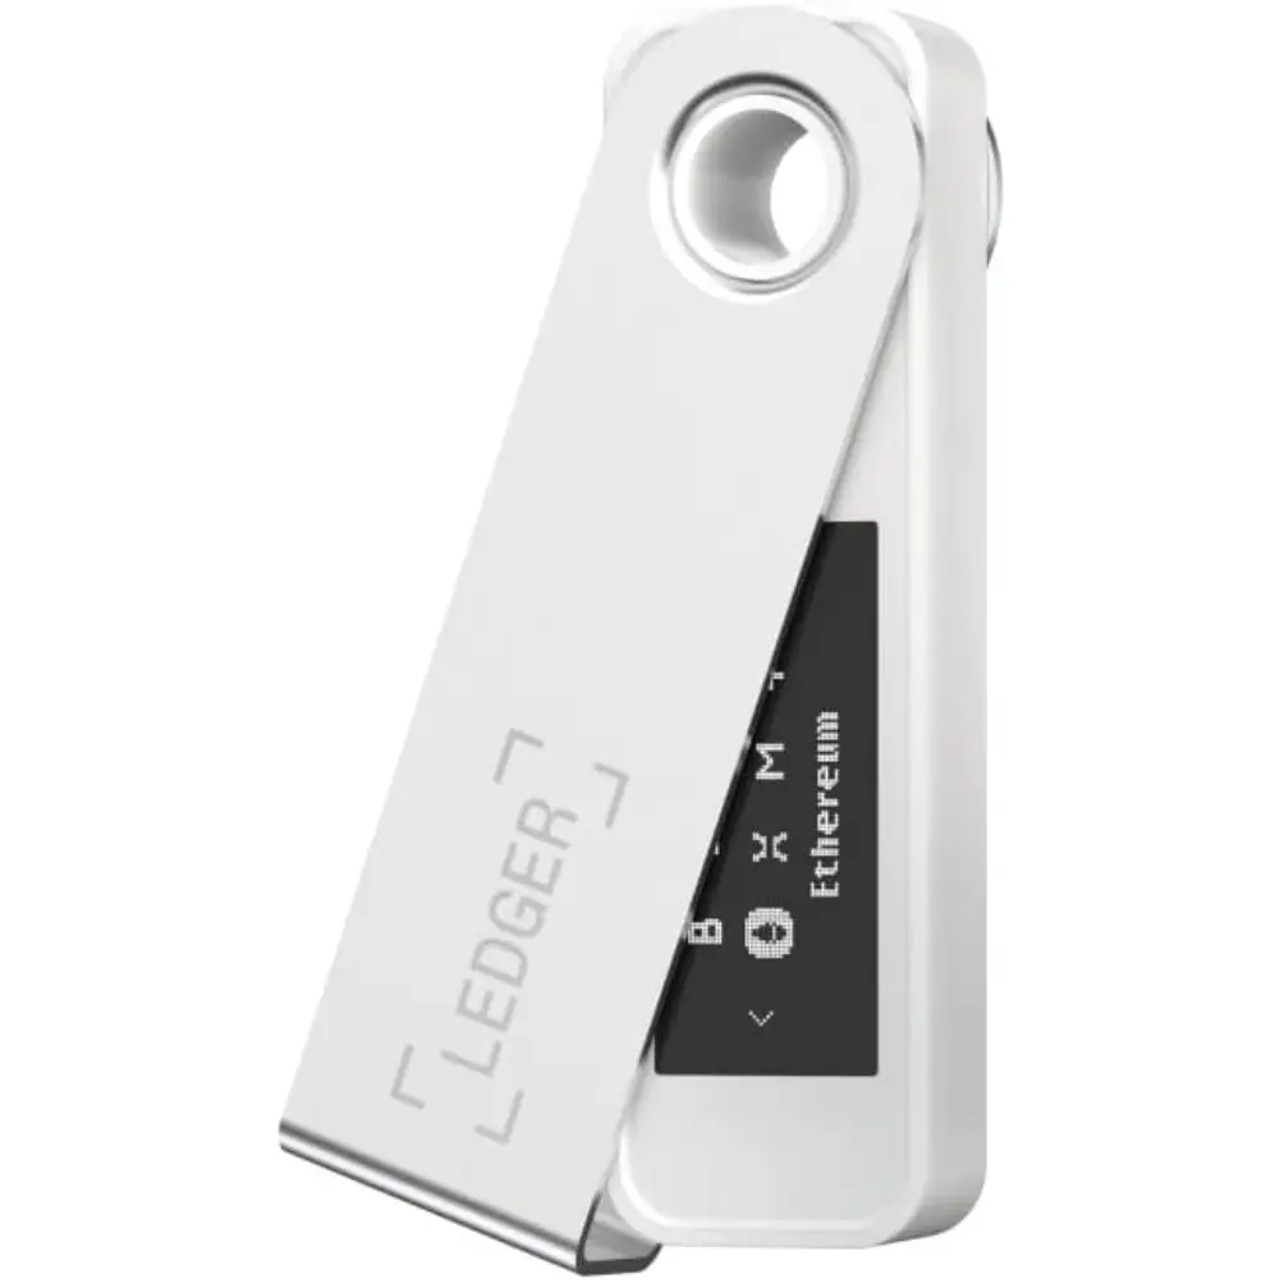 Ledger Nano S Plus Crypto Hardware Wallet - usb2.0, Safeguard Your Crypto,  NFTs and Tokens,Deepsea Blue, AYOUB COMPUTERS